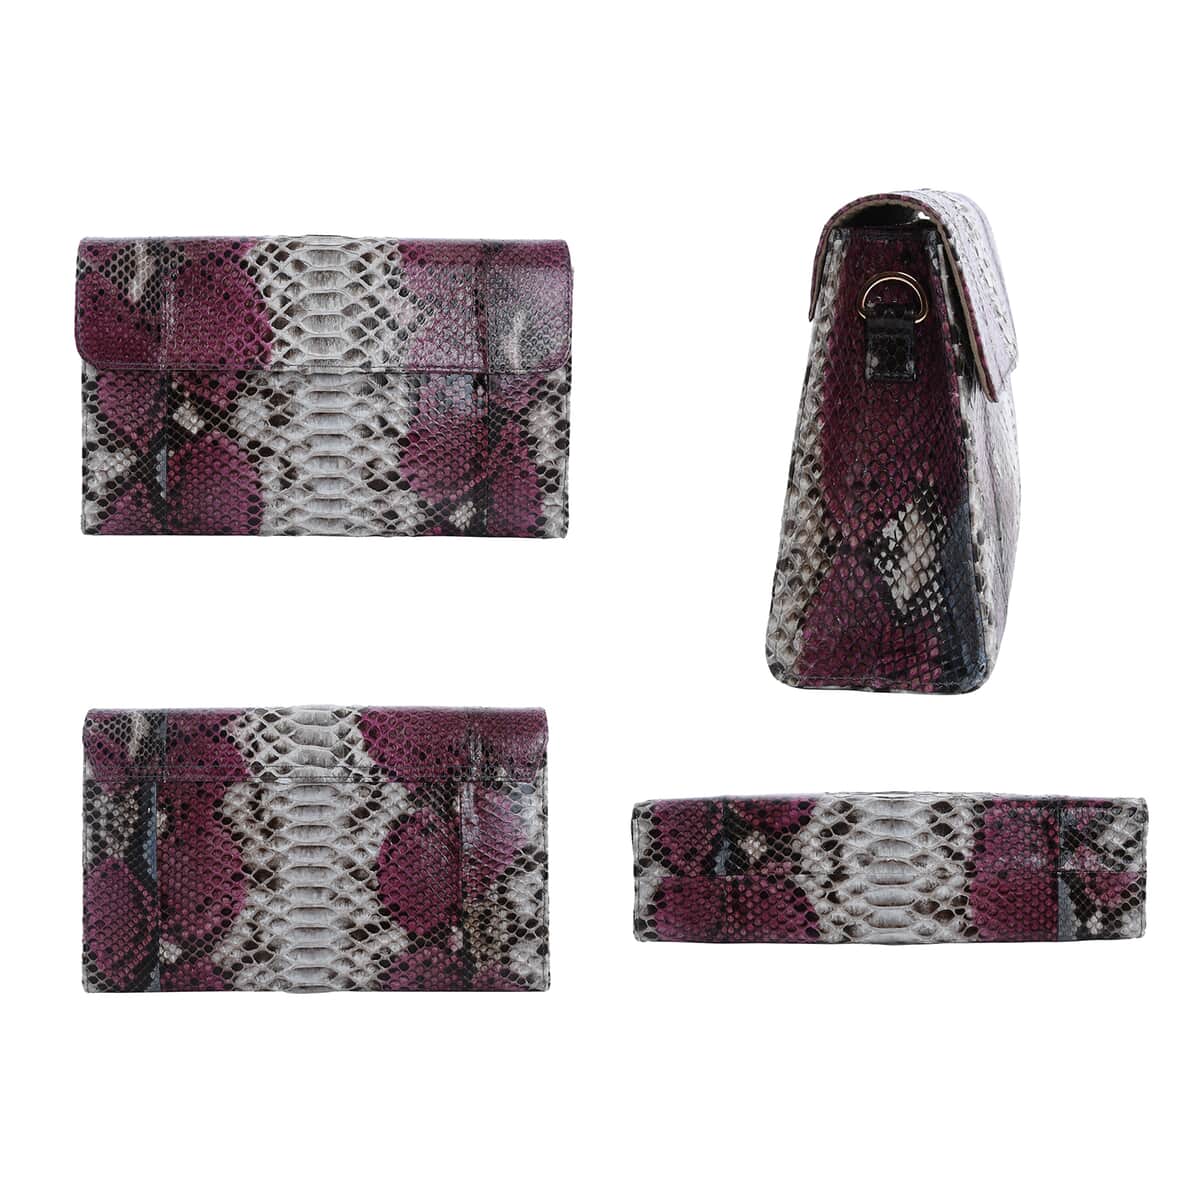 The Pelle Collection Multi Color Python Leather Evening Clutch Bag with Detachable Strap, Clutches for Women, Leather Handbag, Clutch Purse image number 4